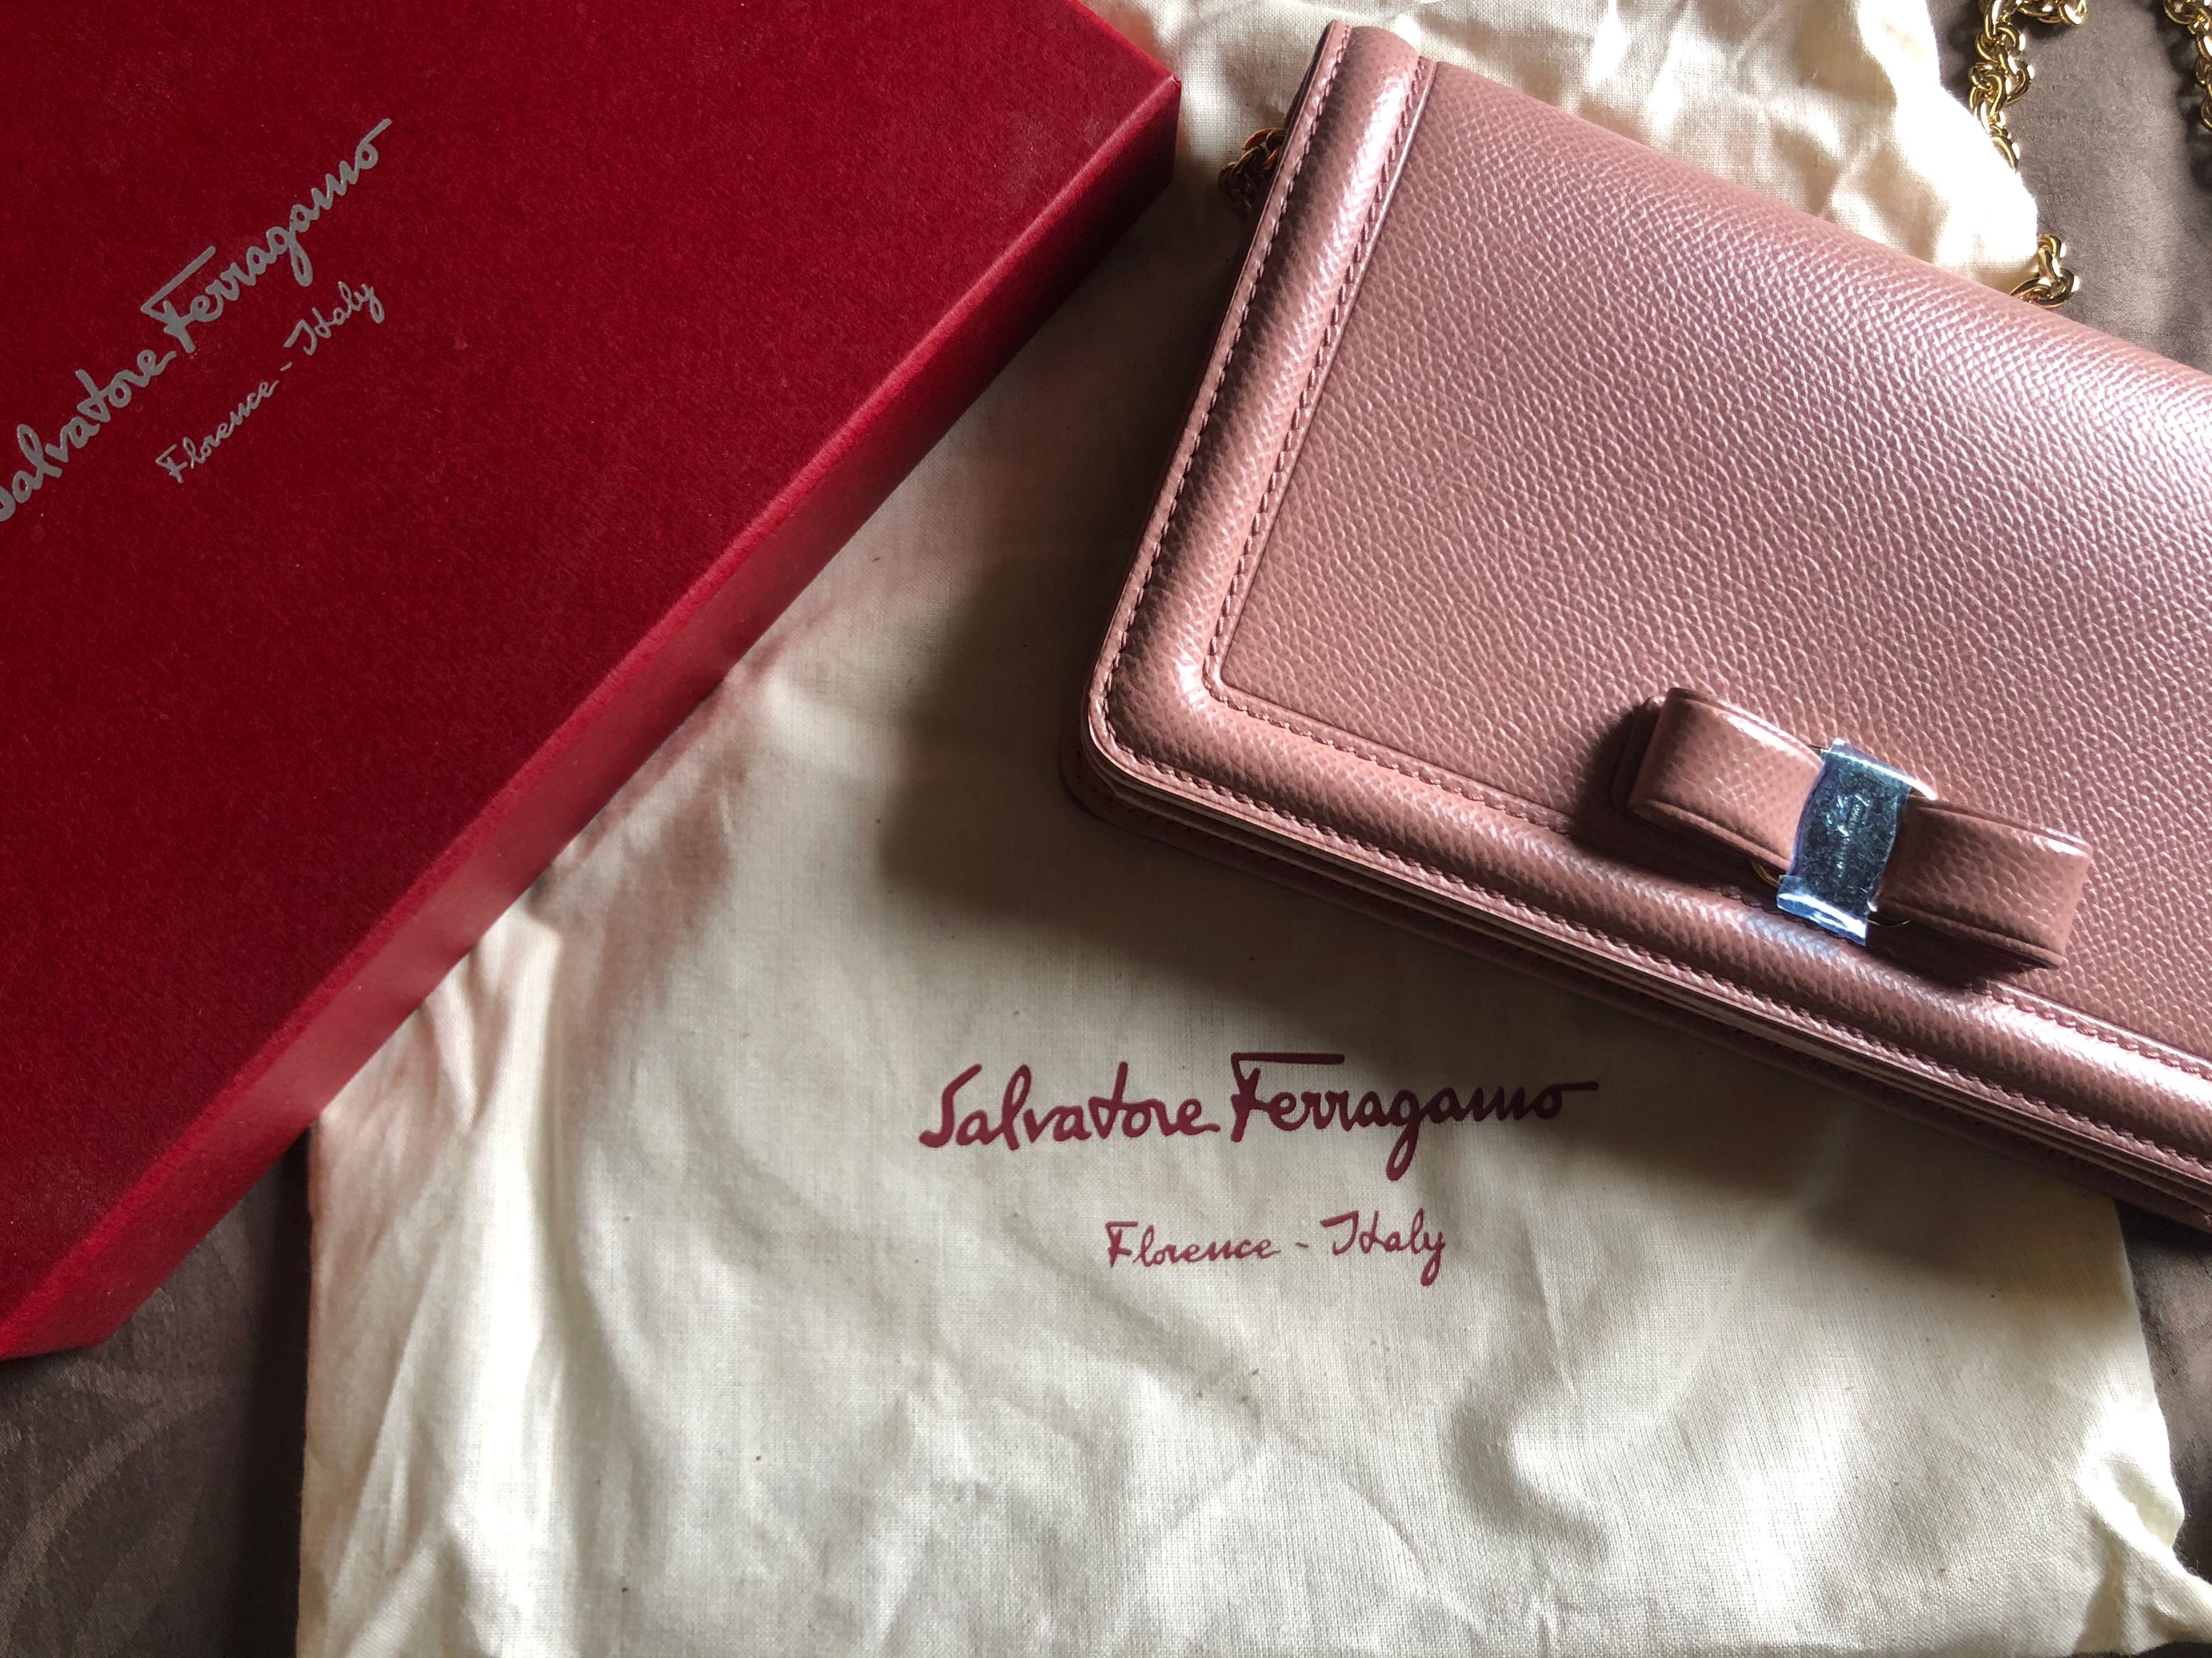 Salvatore Ferragamo Calf Leather Small Wallet On Chain Nylund Pink